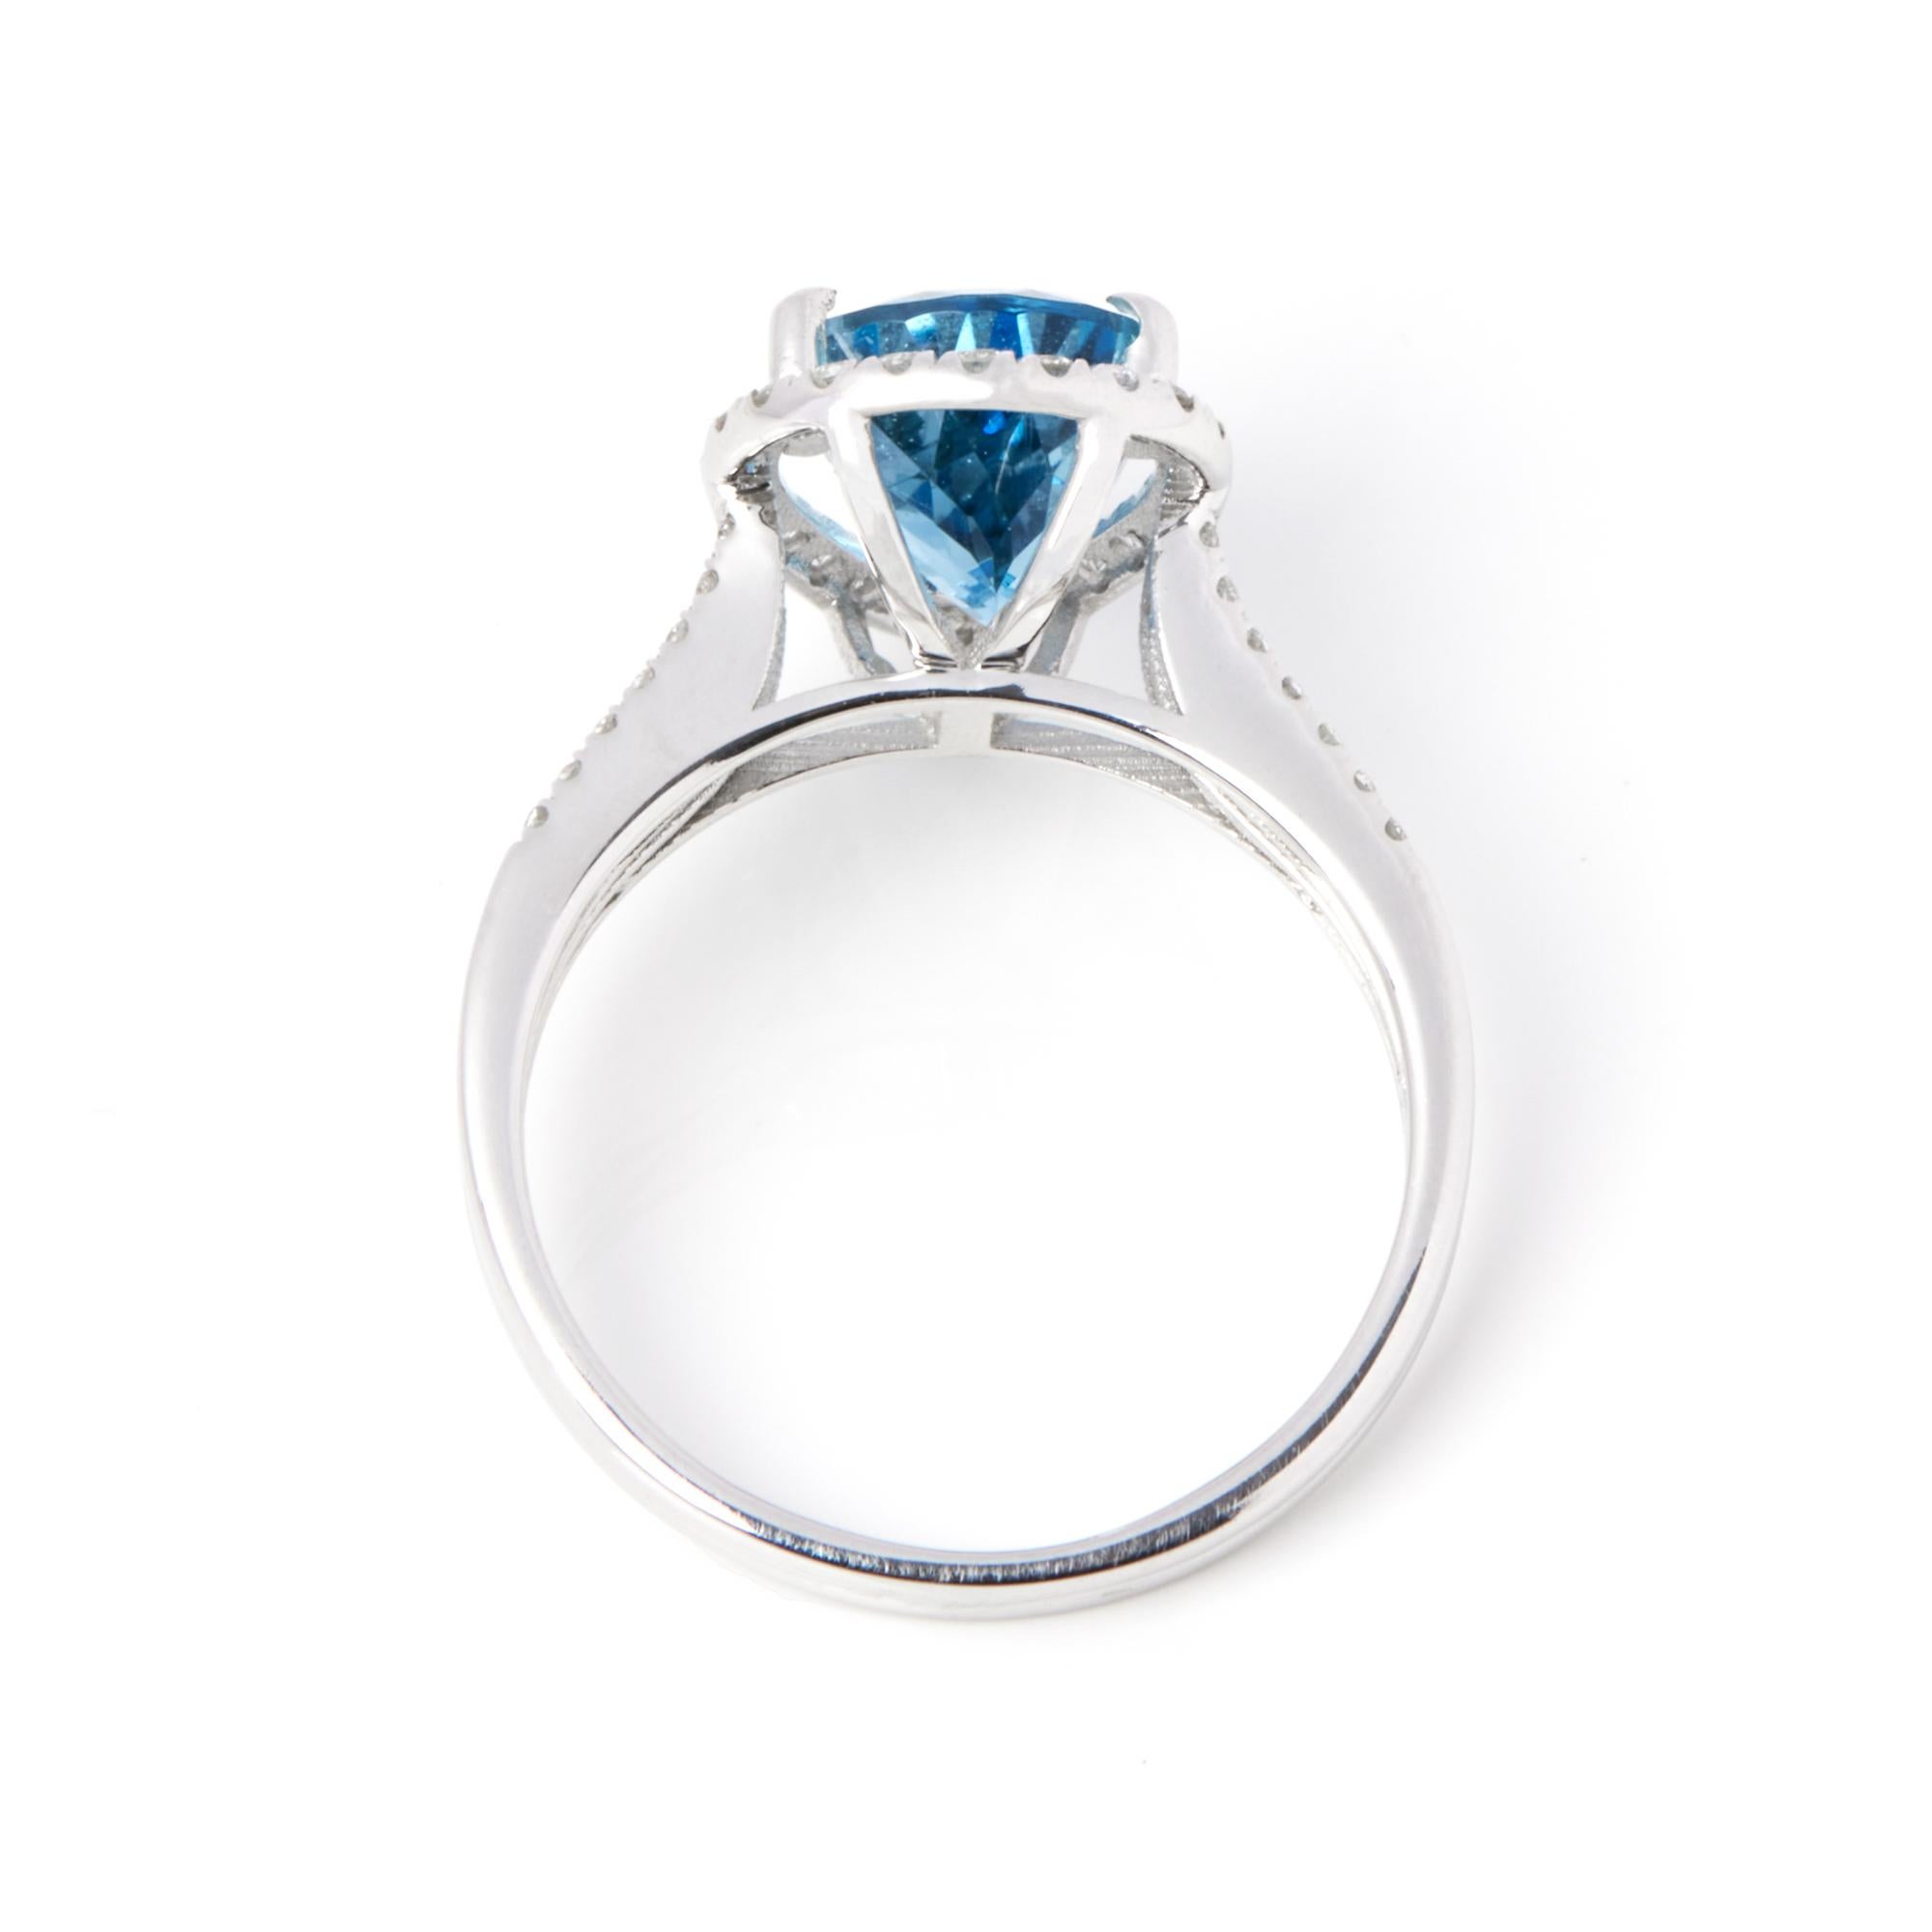 David Jerome Certified 2.52ct Pear Cut Aquamarine and Diamond Ring In New Condition For Sale In Bishop's Stortford, Hertfordshire